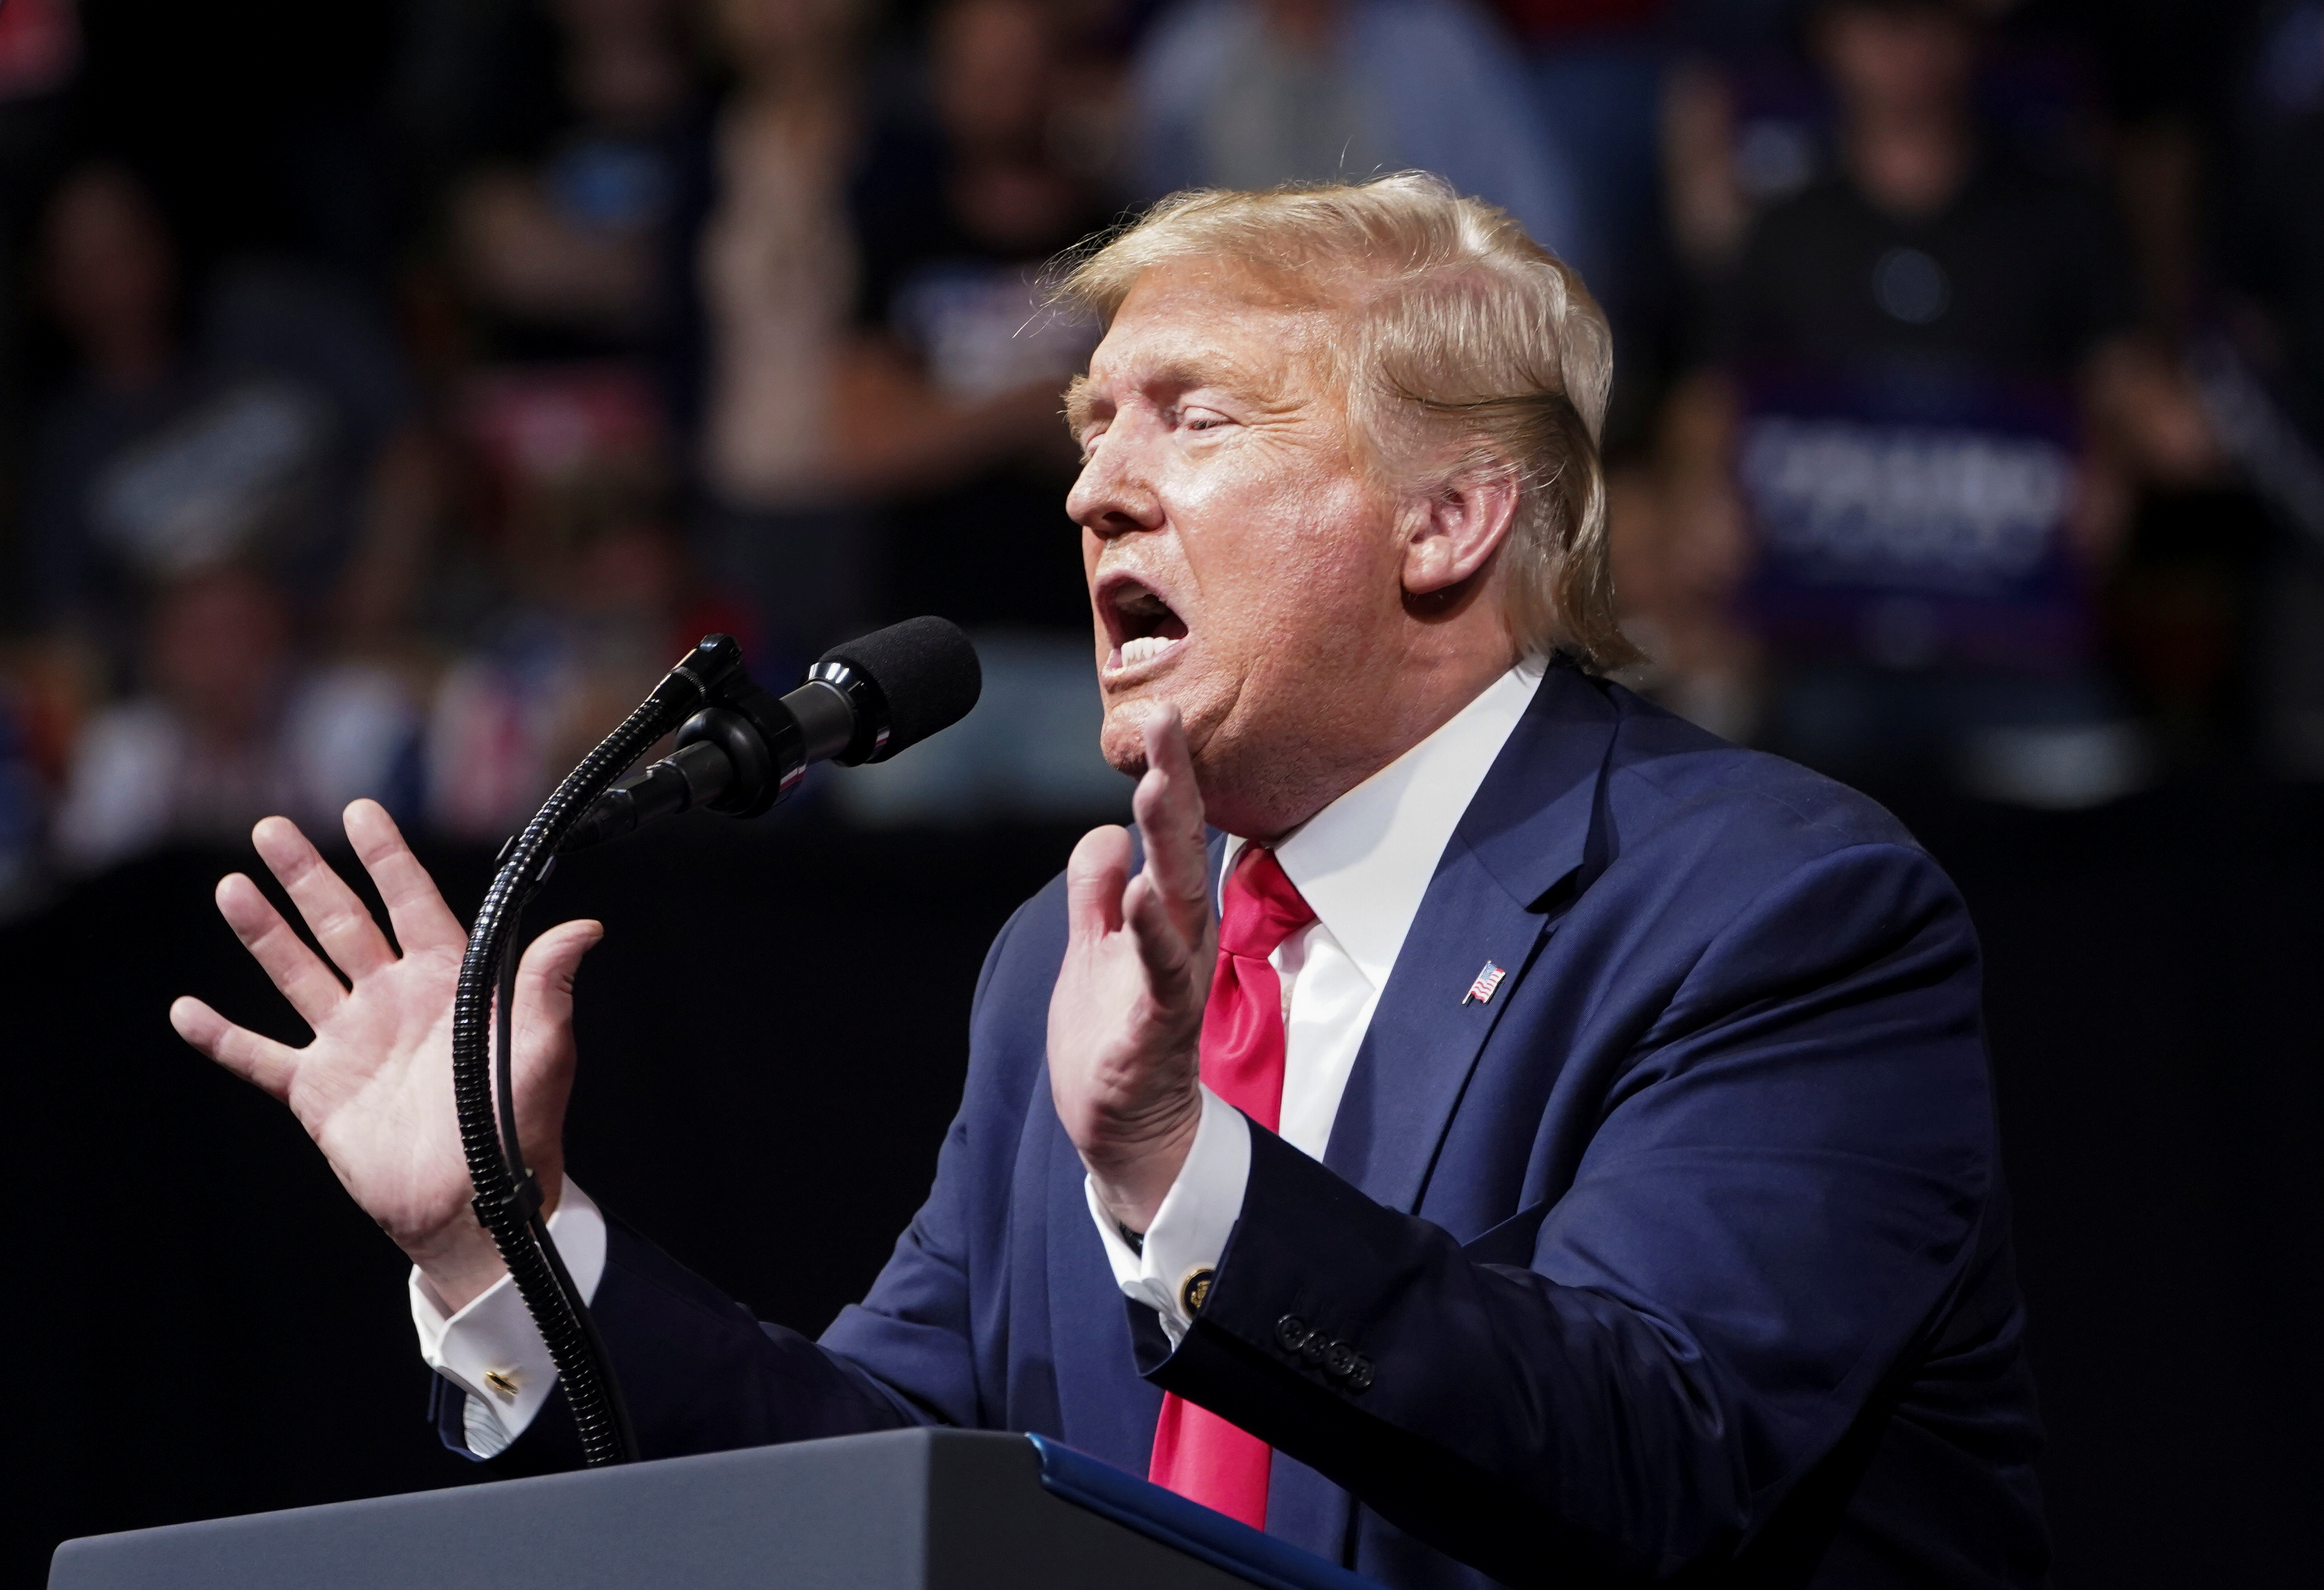 &lt;YONHAP PHOTO-3232&gt; U.S. President Donald Trump holds a campaign rally in Phoenix, Arizona, February 19, 2020. REUTERS/Kevin Lamarque/2020-02-20 13:11:20. 로이터·연합뉴스